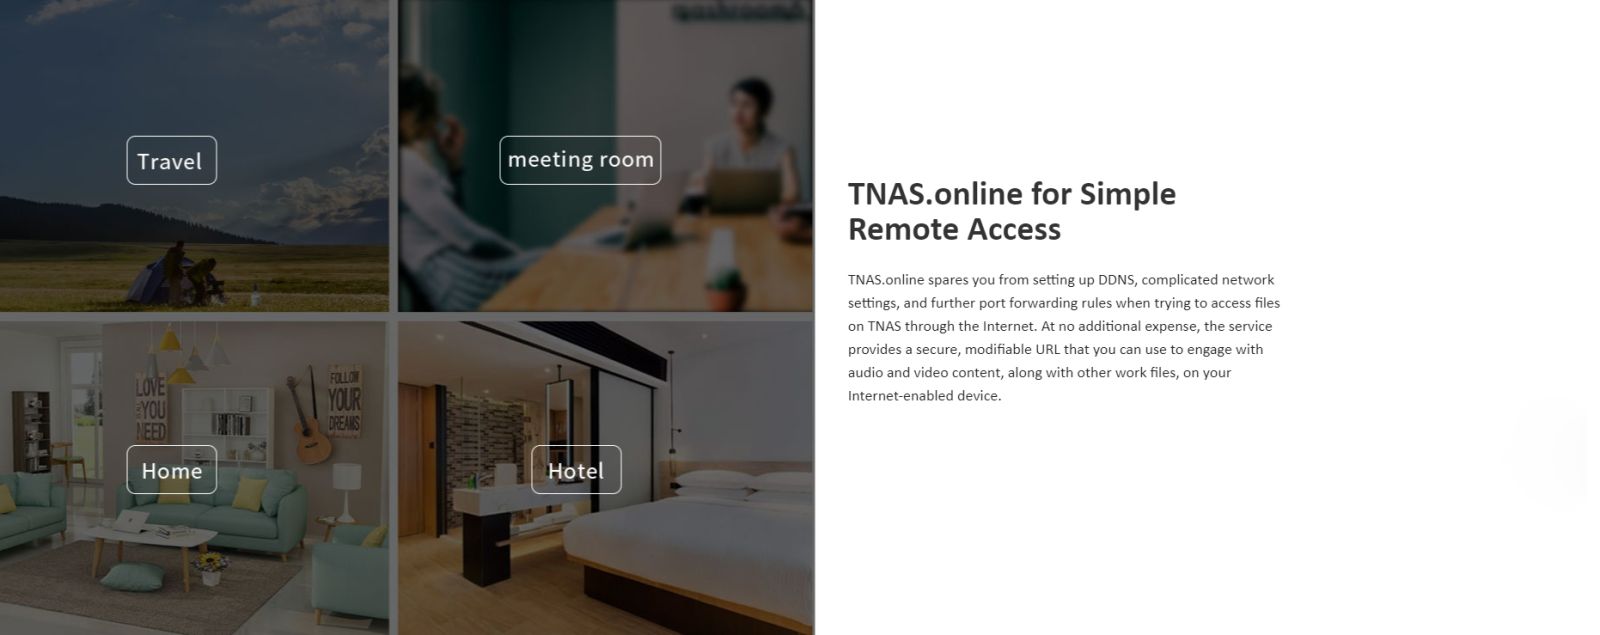 TNAS.online for Simple Remote Access